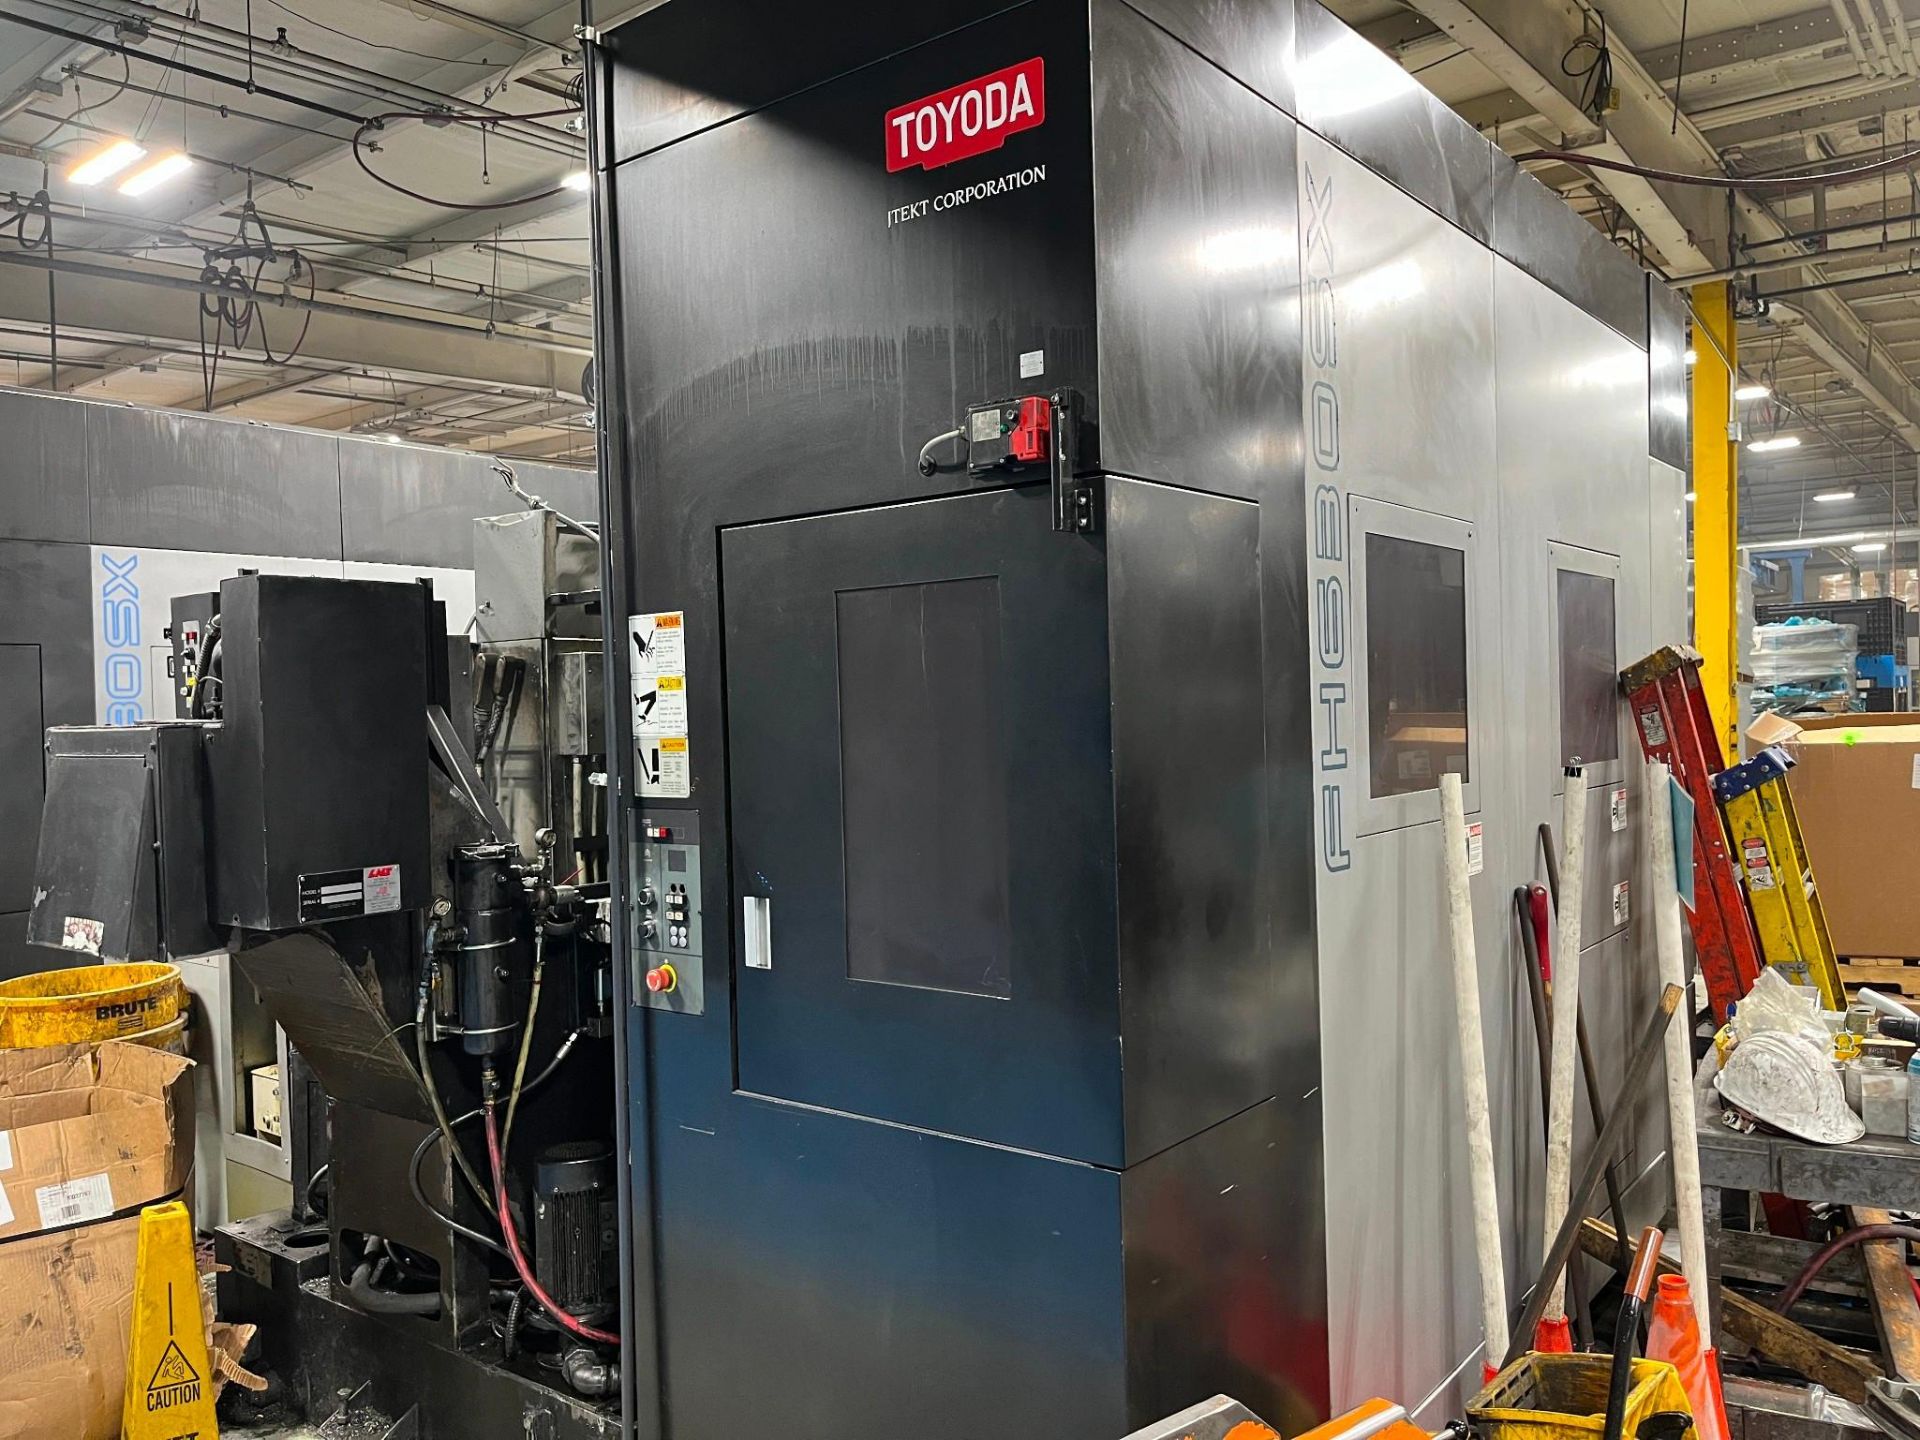 TOYODA FH630SX HMC, 2014 - SPINDLE CHILLER, MAGAZINE, SKID OF SHEET METAL, TRANSFORMER, COOLANT TANK - Image 3 of 10